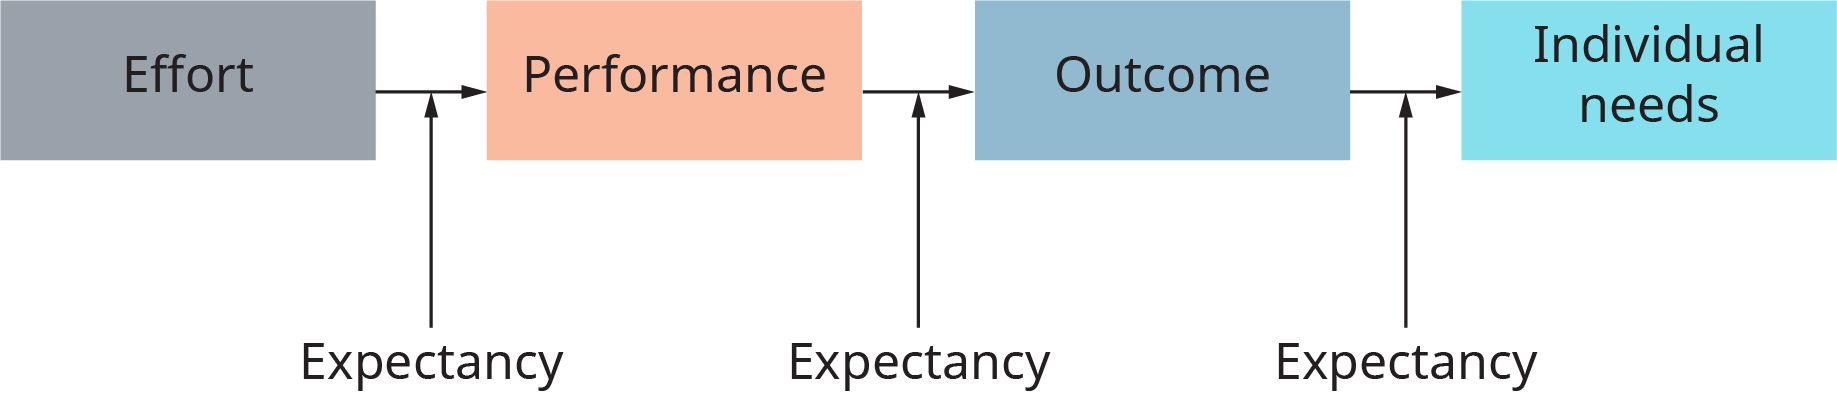 A process is shown as words connected by arrows. The diagram starts with the word effort, and an arrow points to performance. An arrow points from here to the word outcome. An arrow points from here to the words individual needs. Arrows labeled expectancy point to each of the arrows between words in the process.